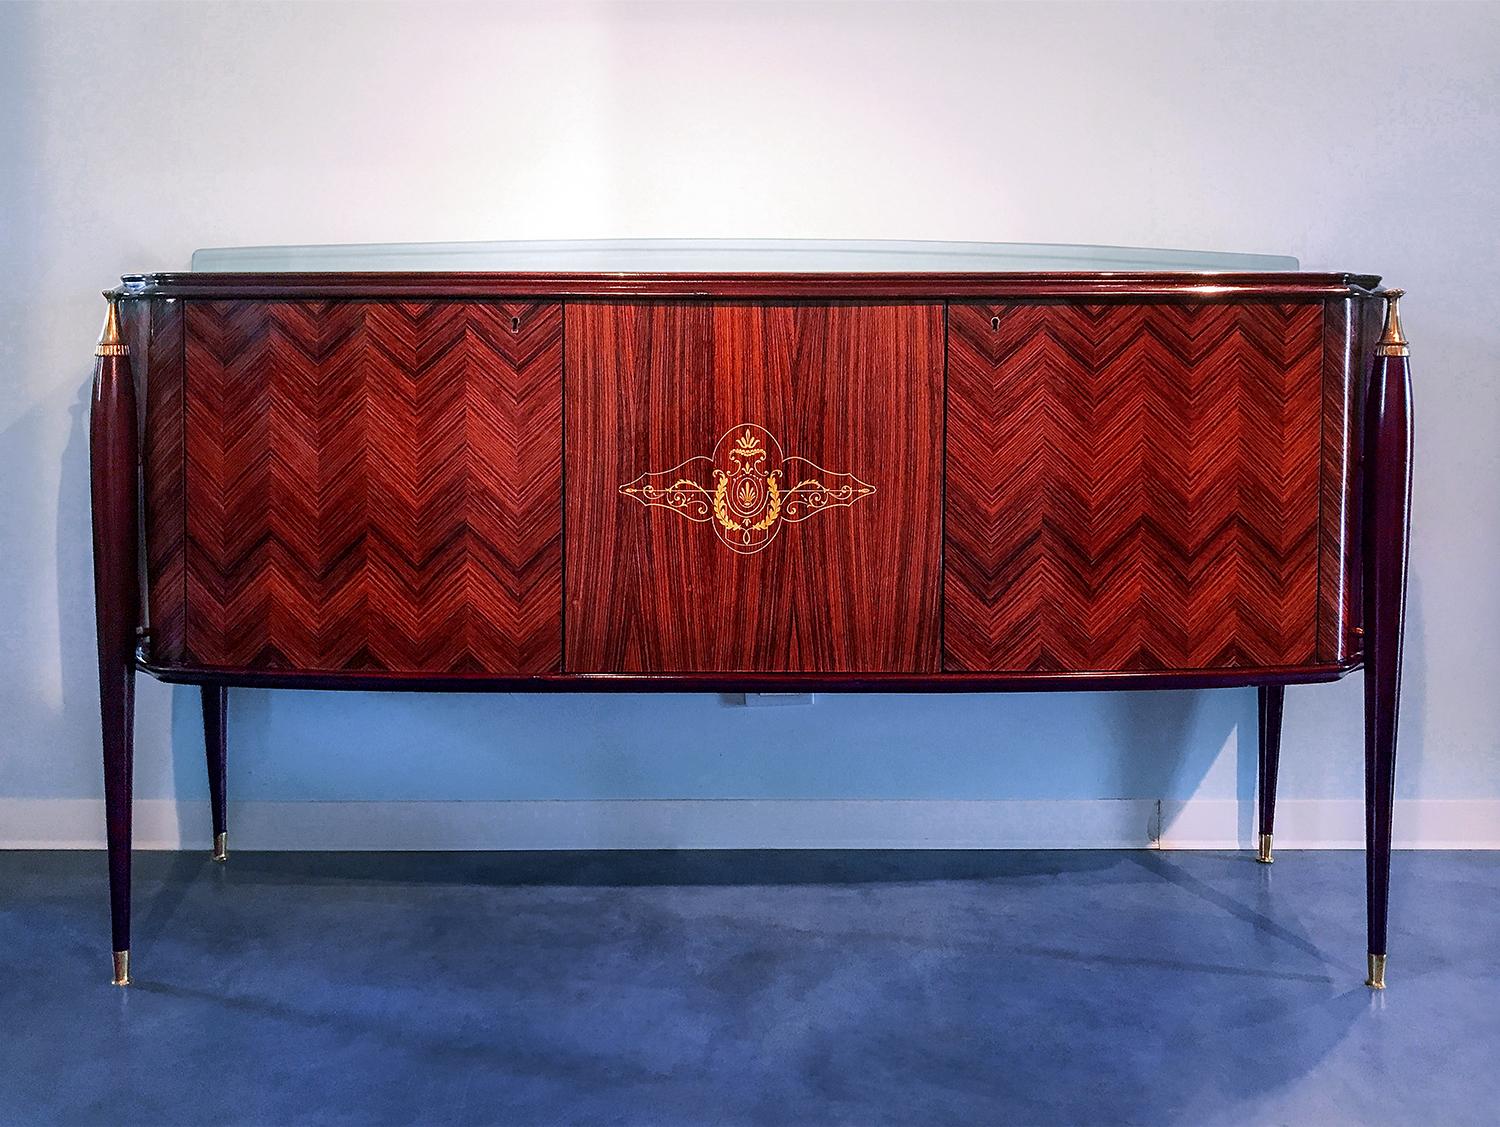 Stunning small Sideboard, very rare and attributable to the design of Paolo Buffa in the 1950s.
It has a unique design, very stylish and charming, characterized by structure with tapered legs finished with fine brass details.
Internally it offers